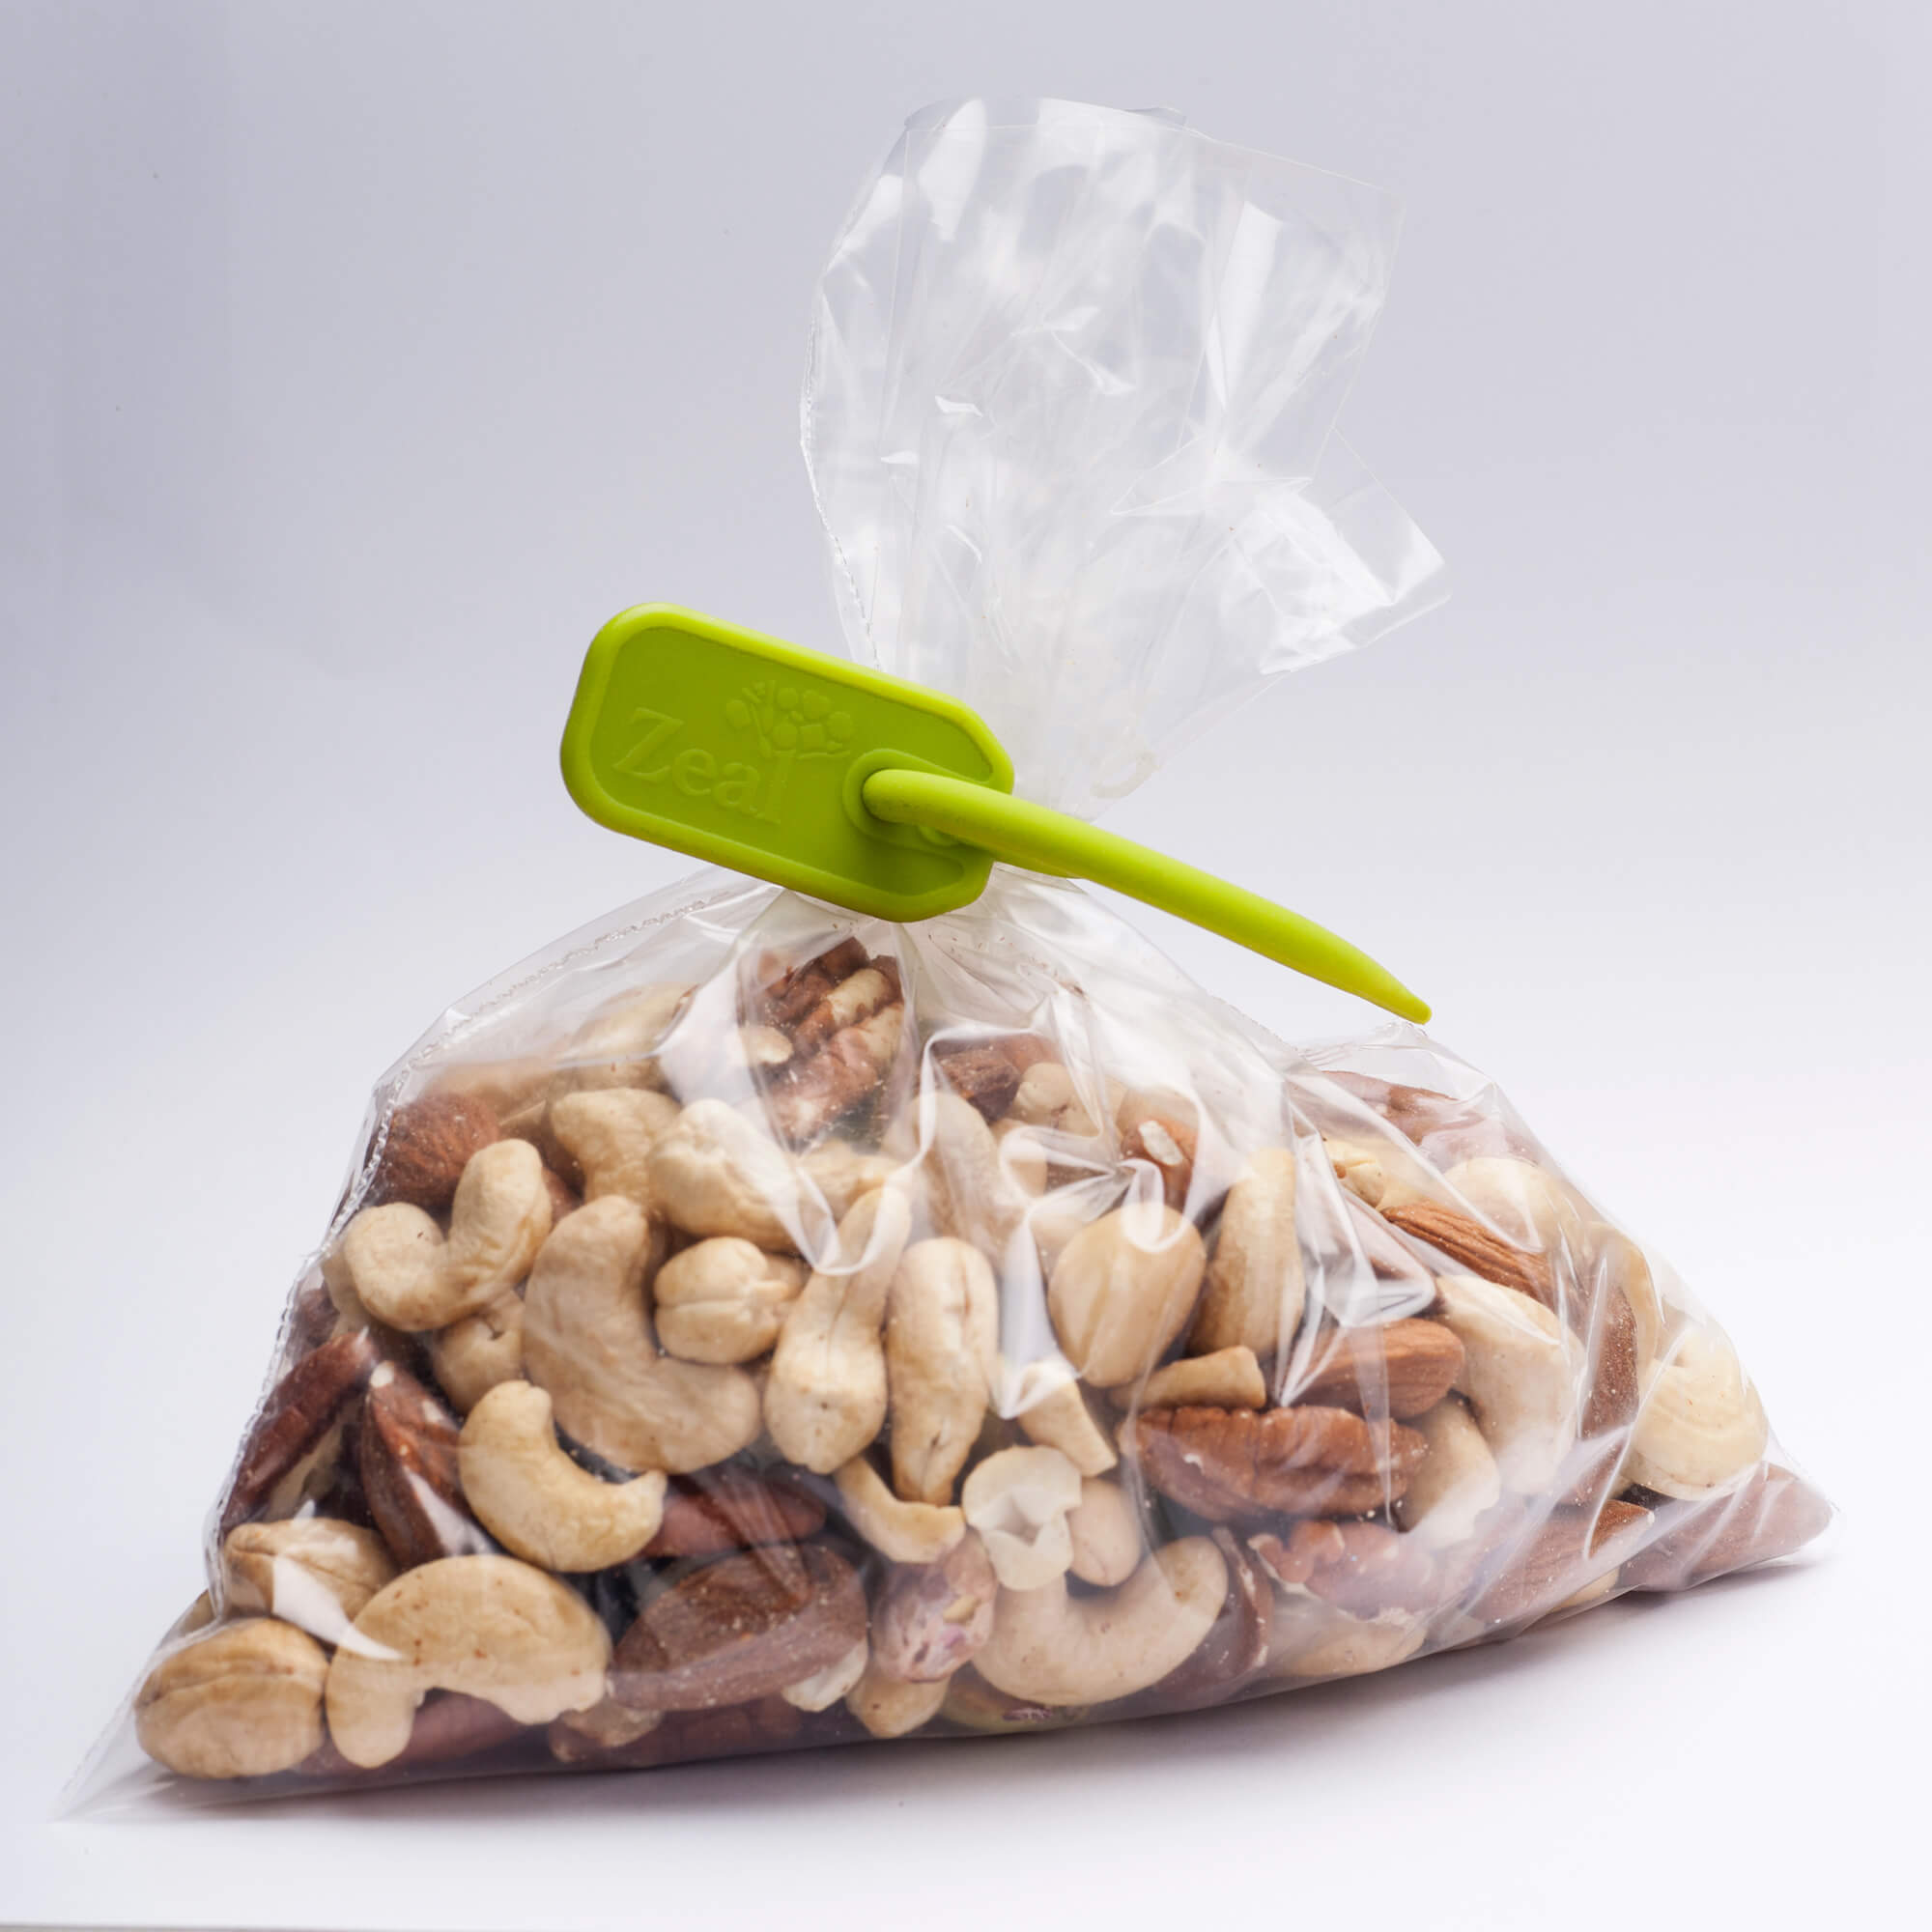 Zeal Silicone Small Bag Ties on a bag of nuts